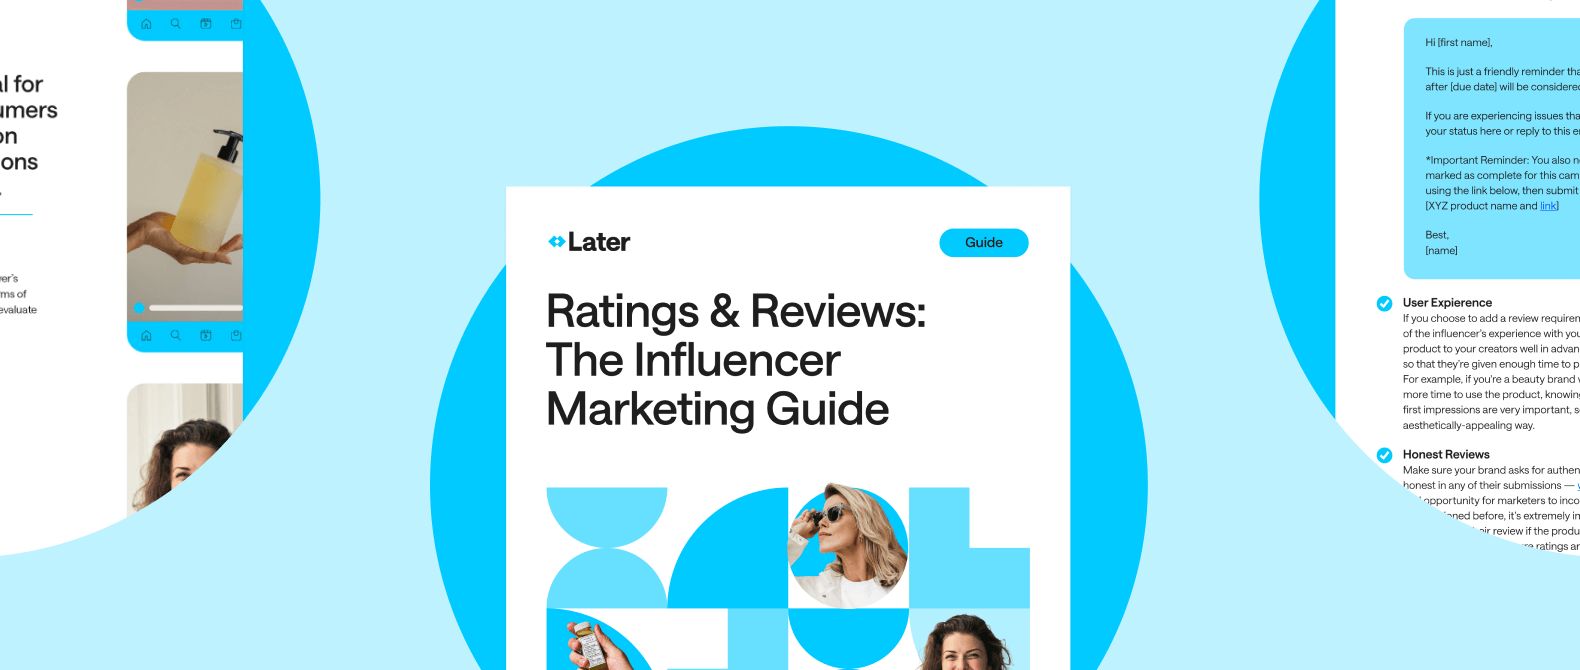 Your Guide to Ratings & Reviews